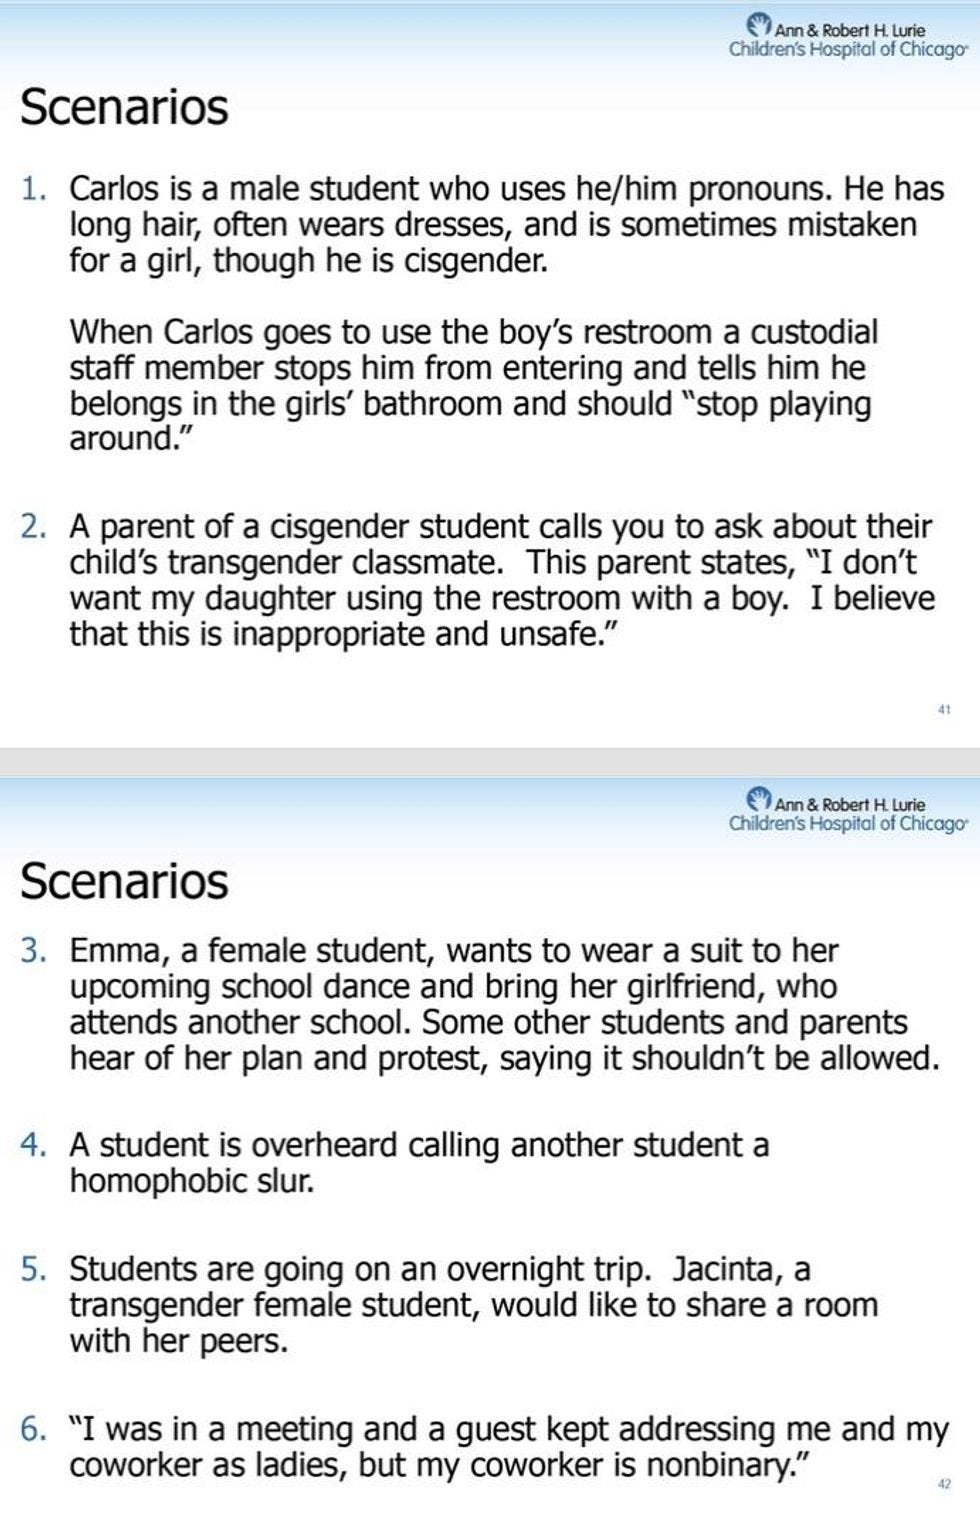 Discussion scenarios:  1. Carlos is a male student who uses he/him pronouns. He has long hair, often wears dresses, and is sometimes mistaken for a girl, though he is cisgender.  When Carlos goes to use the boy's restroom a custodial staff member stops him from entering and tells him he belongs in the girls' bathroom and should "stop playing around."  2. A parent of a cisgender student calls you to ask about their child's transgender classmate. This parent states, "I don't want my daughter using the restroom with a boy. I believe that this is inappropriate and unsafe."   3. Emma, a female student, wants to wear a suit to her upcoming school dance and bring her girlfriend, who attends another school. Some other students and parents hear of her plan and protest, saying it shouldn't be allowed.  4. A student is overheard calling another student a homophobic slur.   5 Students are going on an overnight trip. Jacinto, a transgender female student, would like to share a room with her peers.  6. "I was in a meeting and a guest kept addressing me and my coworker as ladies, but my coworker is nonbinary."